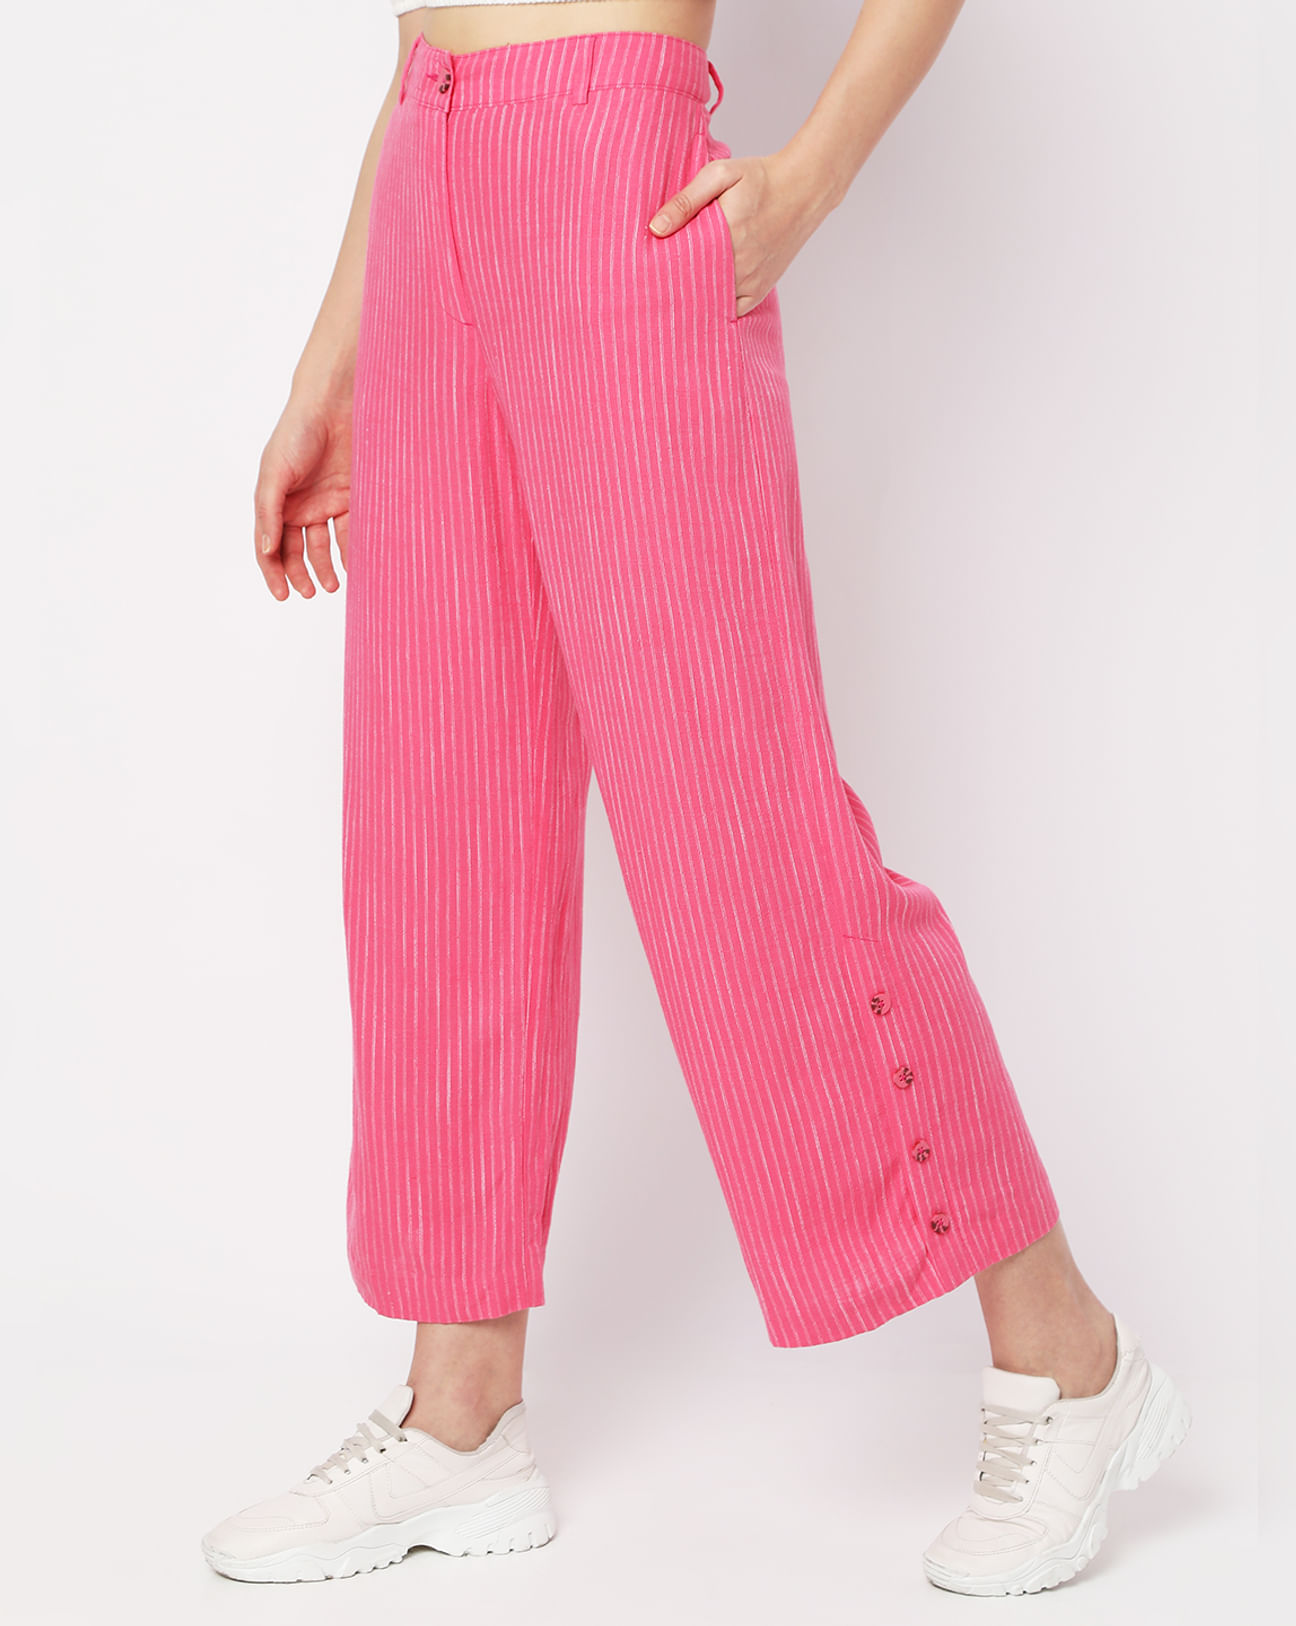 Buy Pink High Rise Striped Pants For Women Online in India